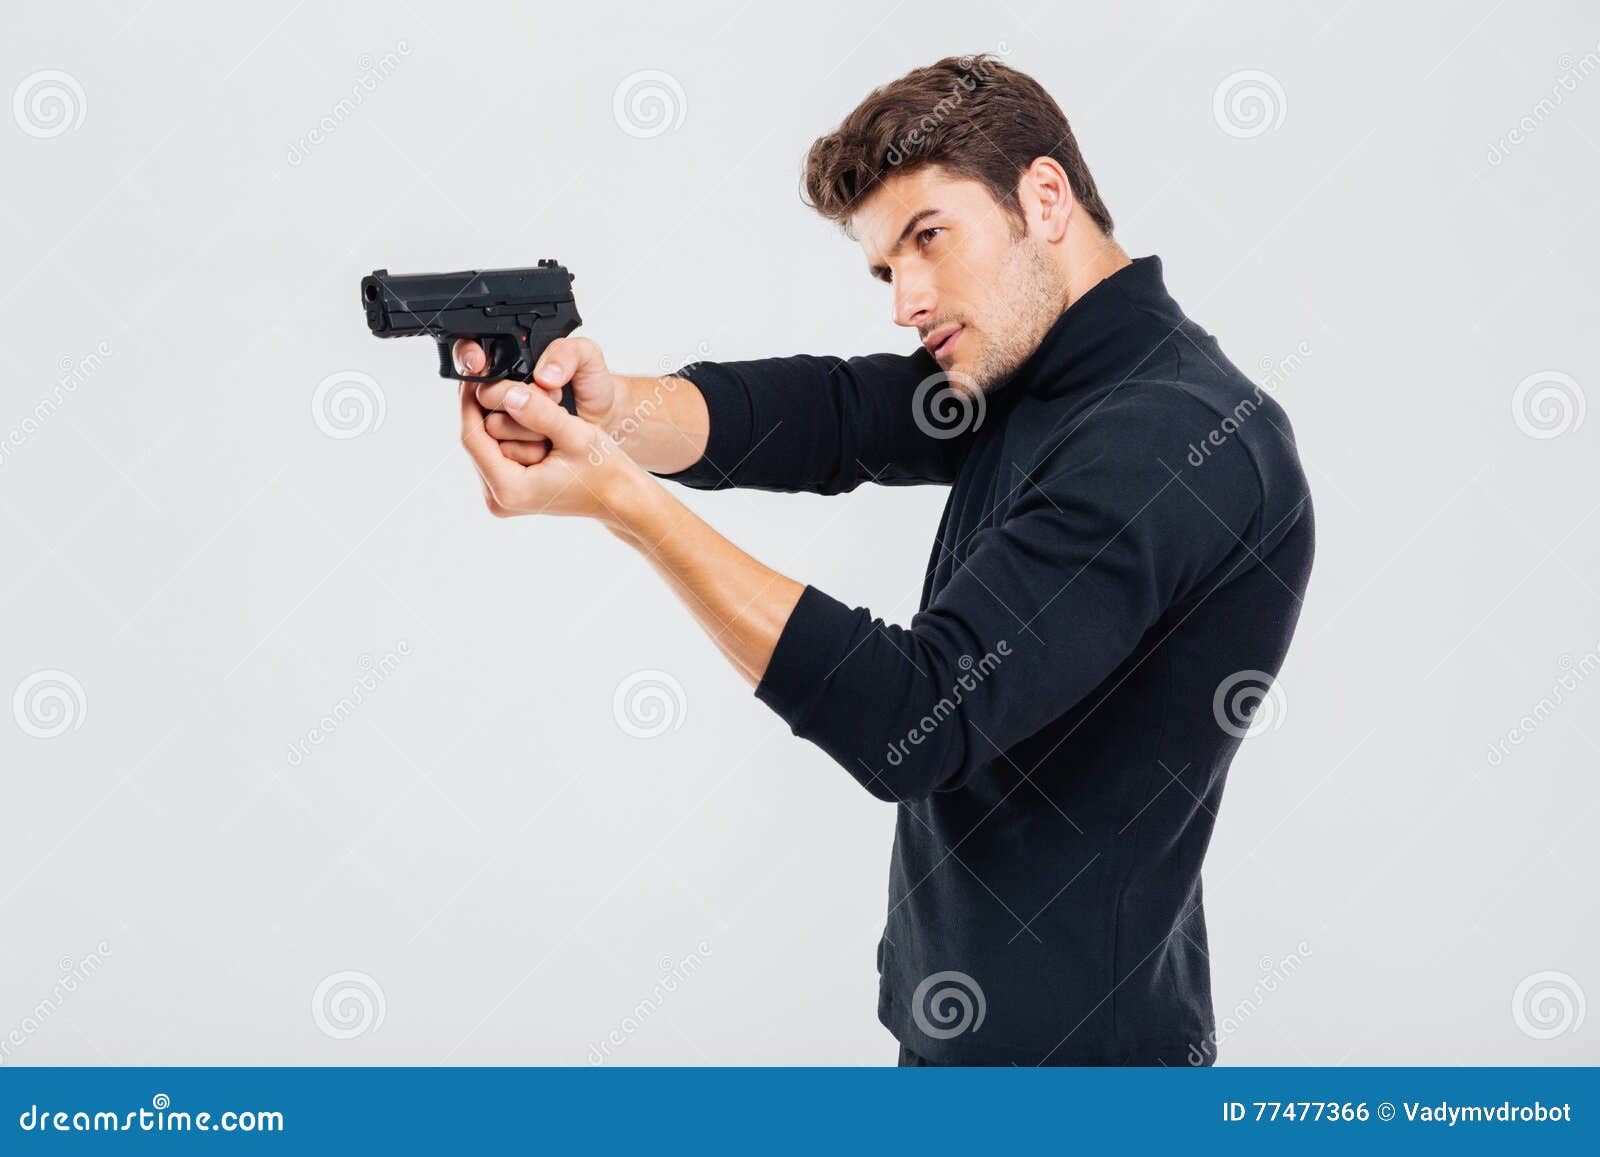 Holding a pistol with two hands